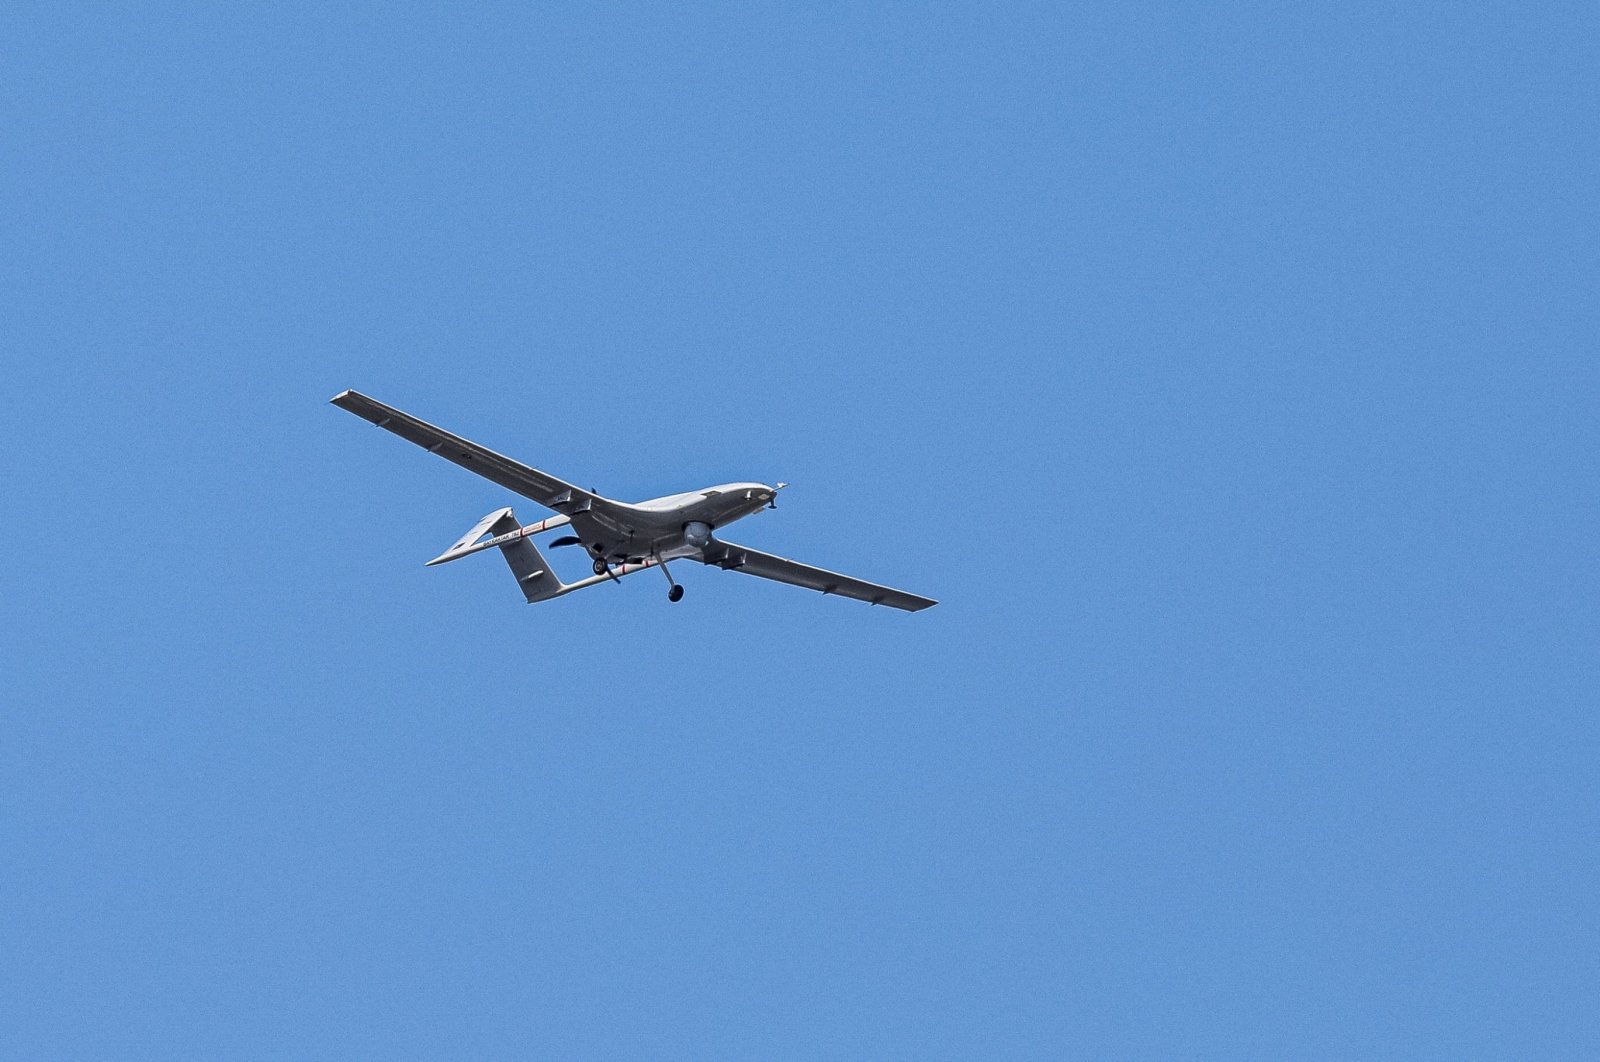 A Bayraktar TB2 unmanned combat aerial vehicle is seen during a demonstration flight at the Teknofest aerospace and technology festival in Baku, Azerbaijan, May 27, 2022. (Reuters Photo)